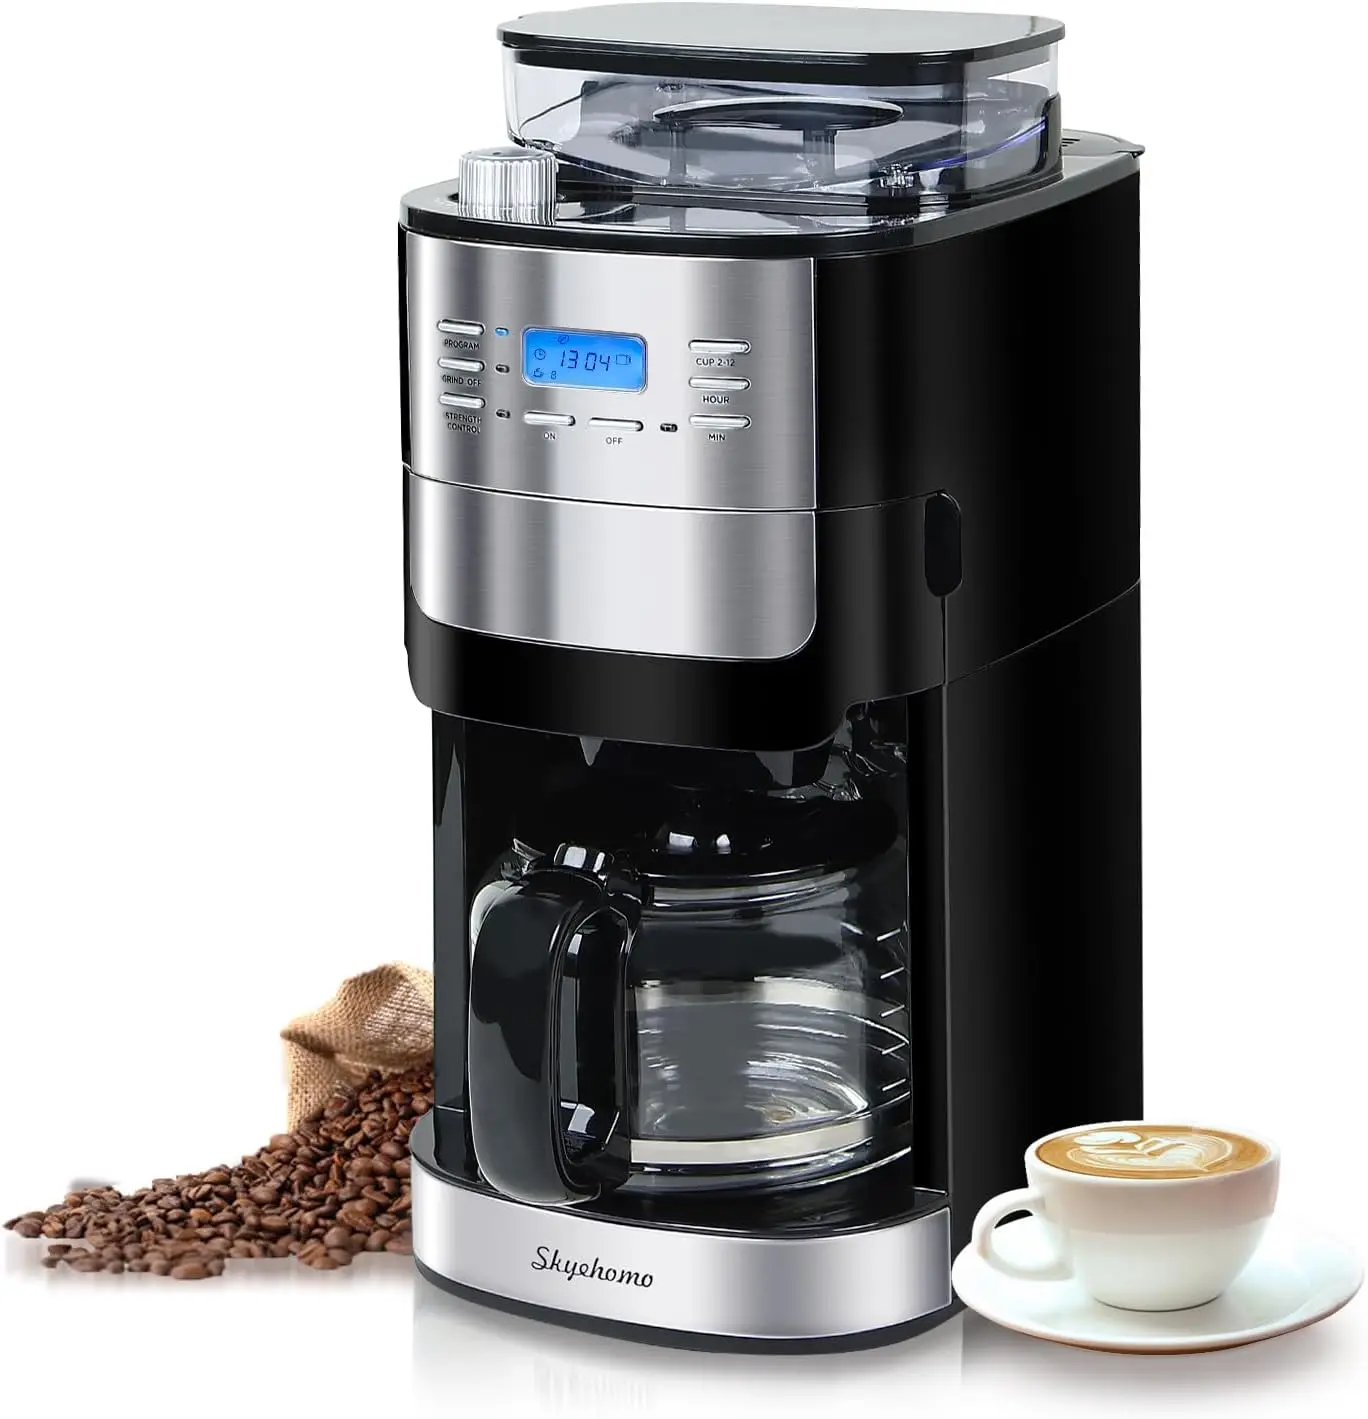 

Cup Drip Coffee Maker with Built-In Burr Coffee Grinder, Programmable Coffee Machine with Timer, Glass Carafe, Reusable Filter,